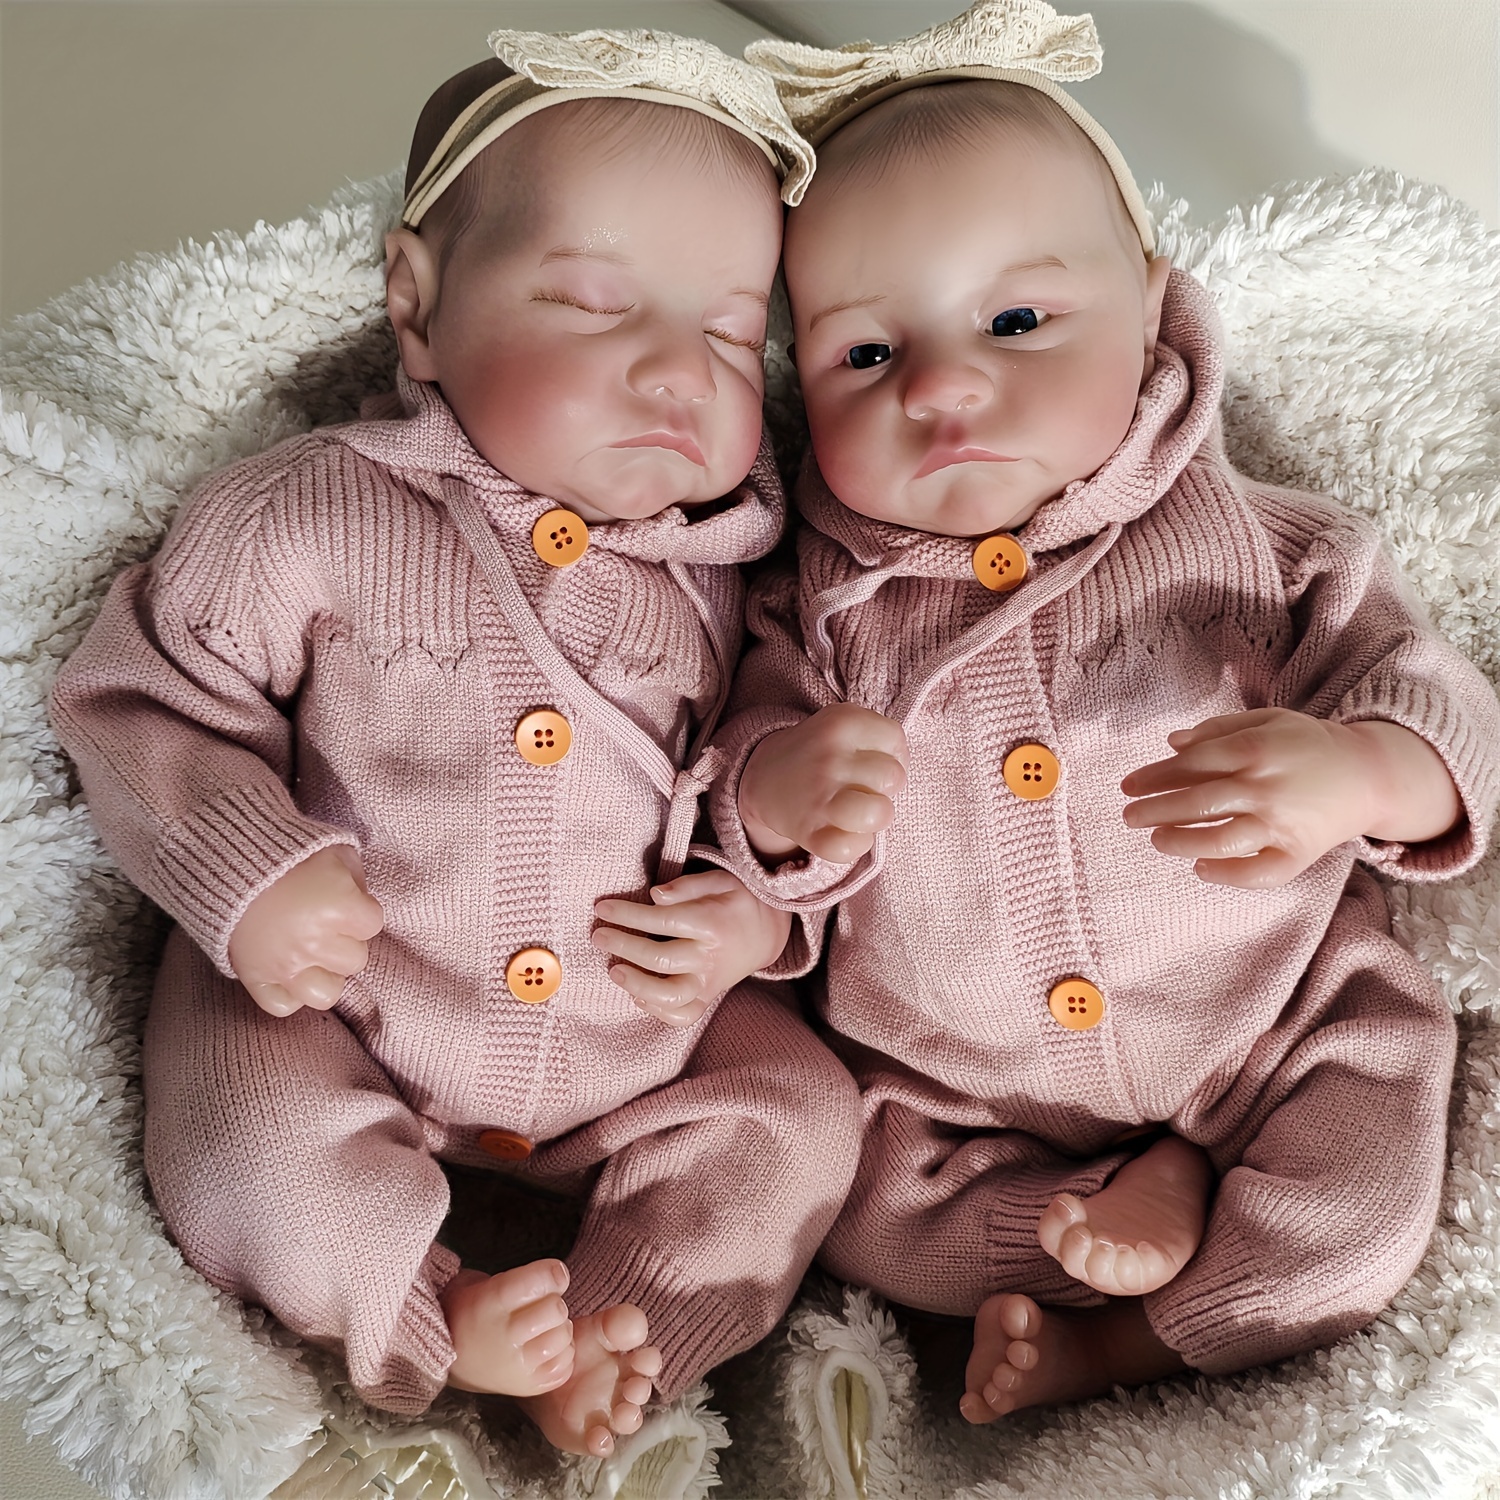 iCradle 2PCS Reborn Baby Dolls Twins Silicone Full Body Boy and Girl  Realistic Look Weighted Washable Bath Babies Sleeping and Awake Dolls for  Adults